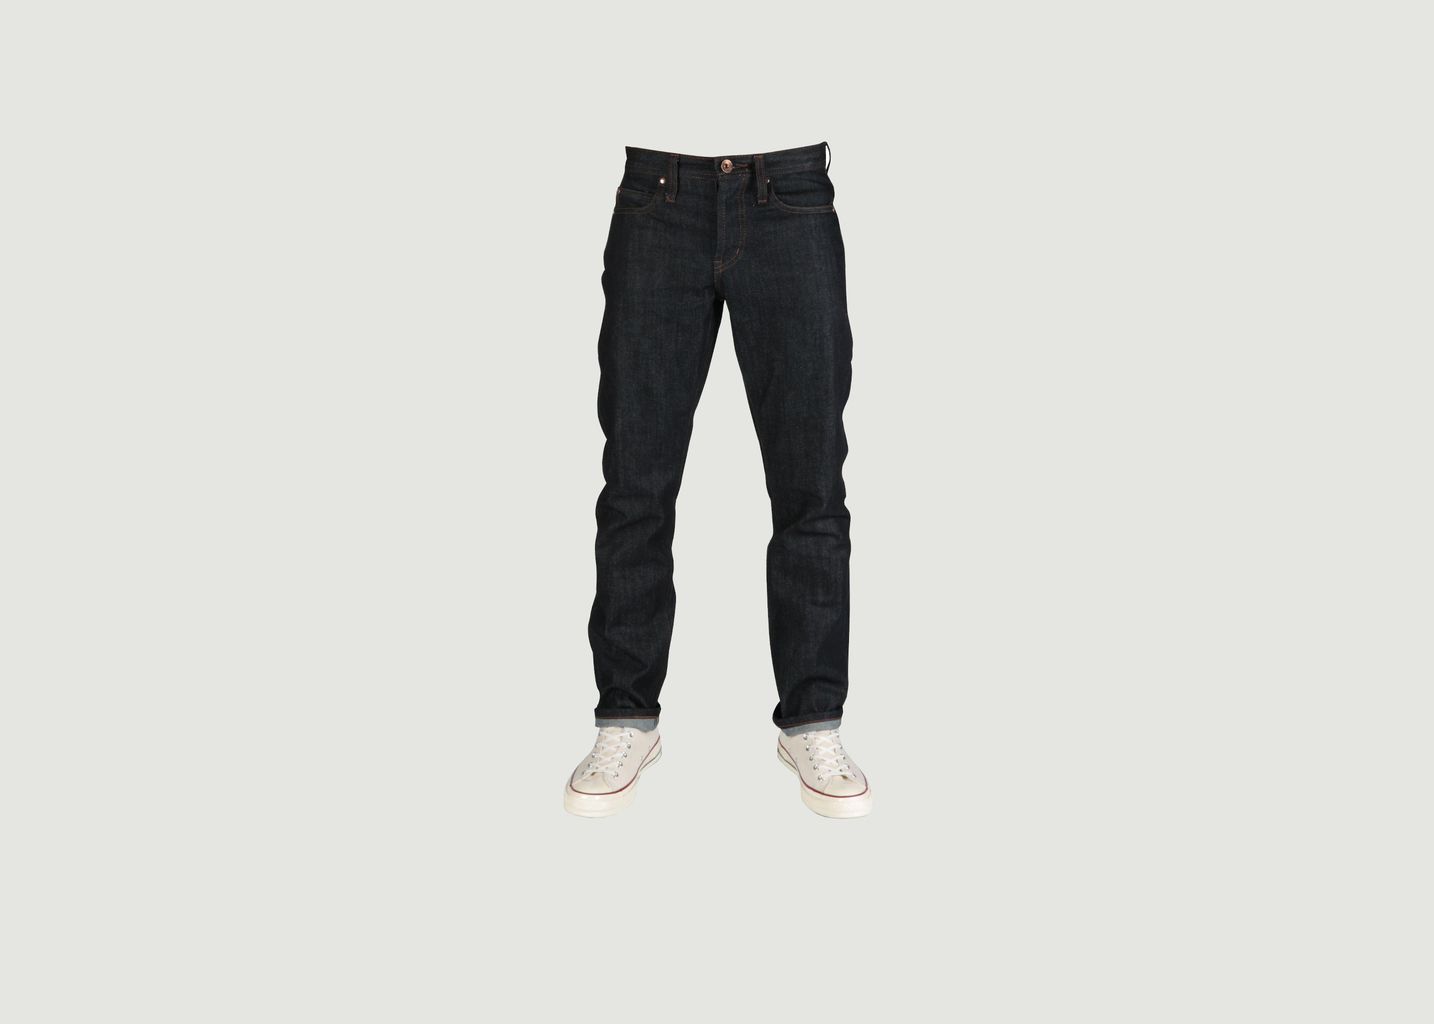 The Unbranded Brand Jean UB 101